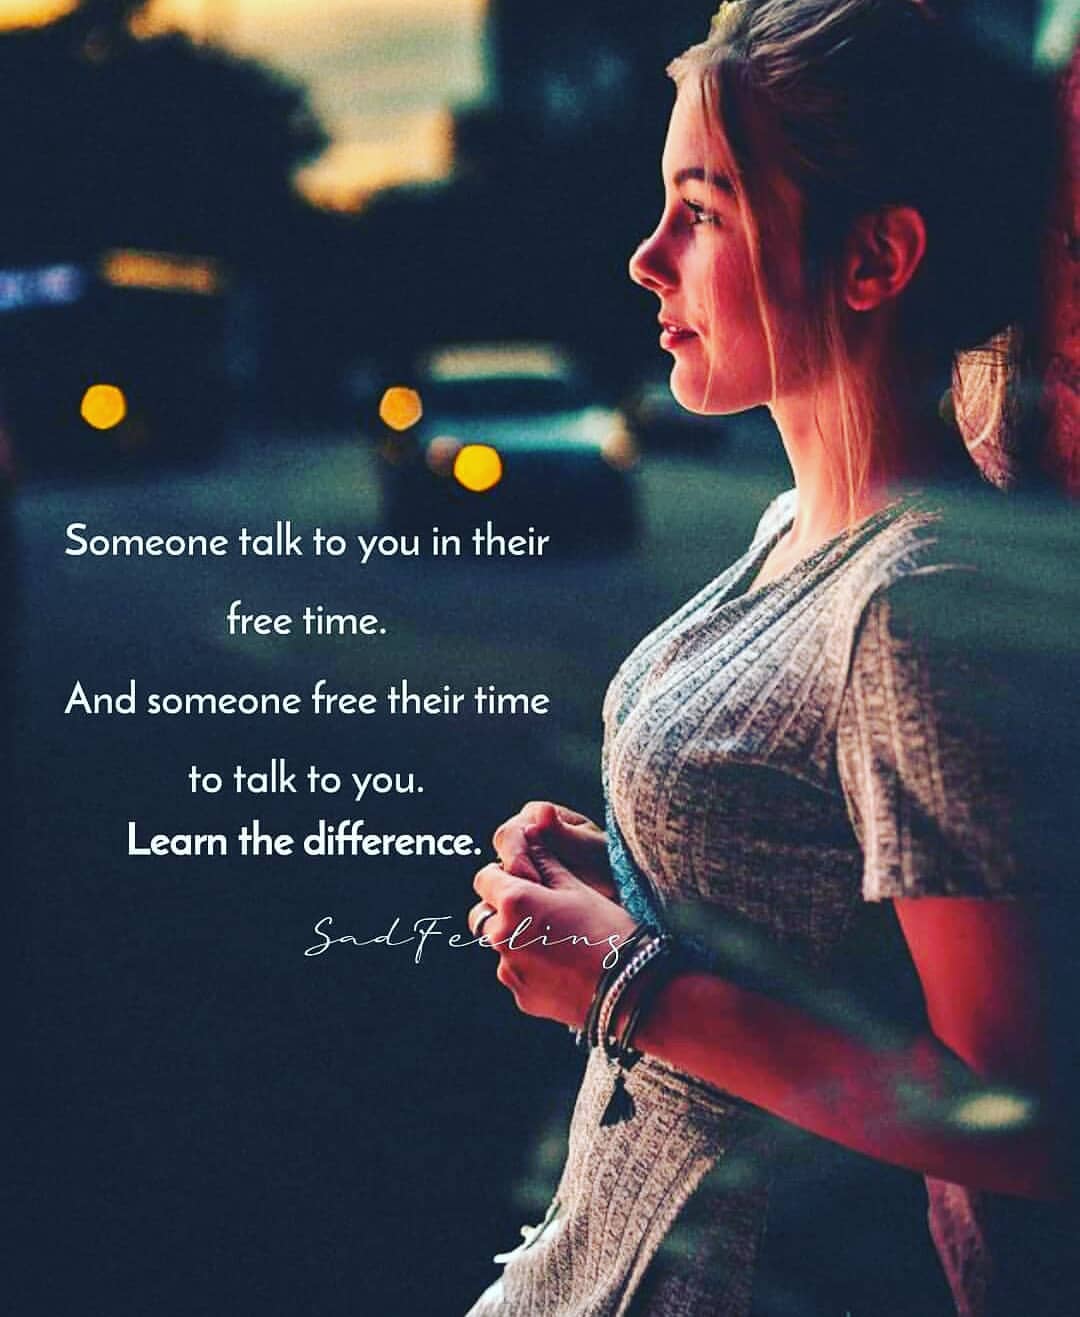 Someone talk to you in their free time. And someone free their time to talk to you. Learn the difference.